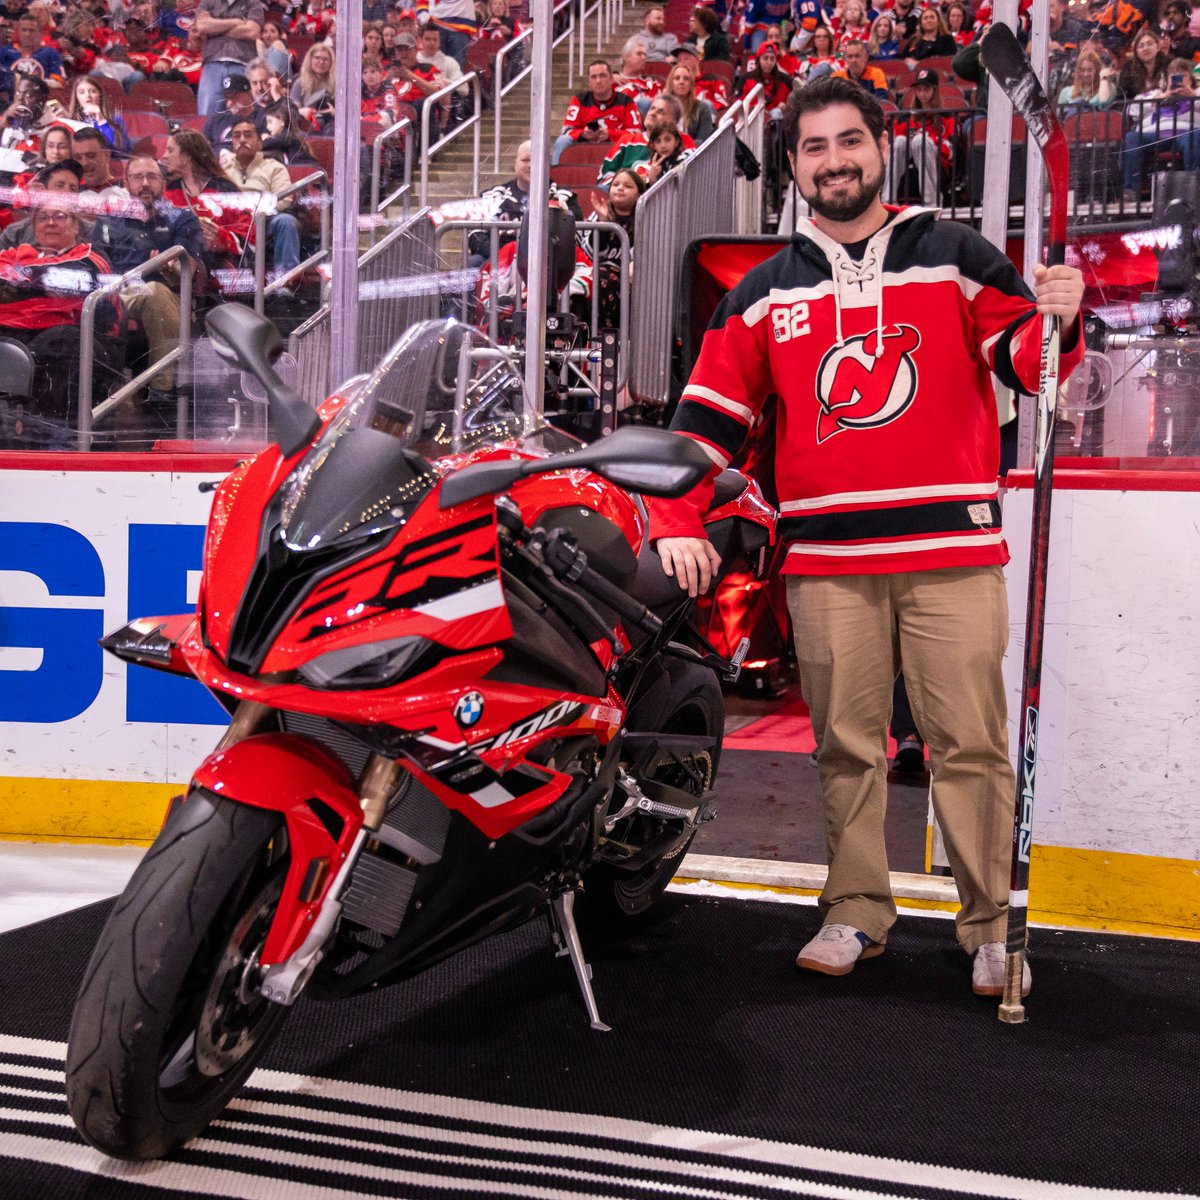 Leaving tonight's game in style. Congrats to Michael, who brings home this custom motorcycle signed by the team! #NJDevils | @Halmarusa